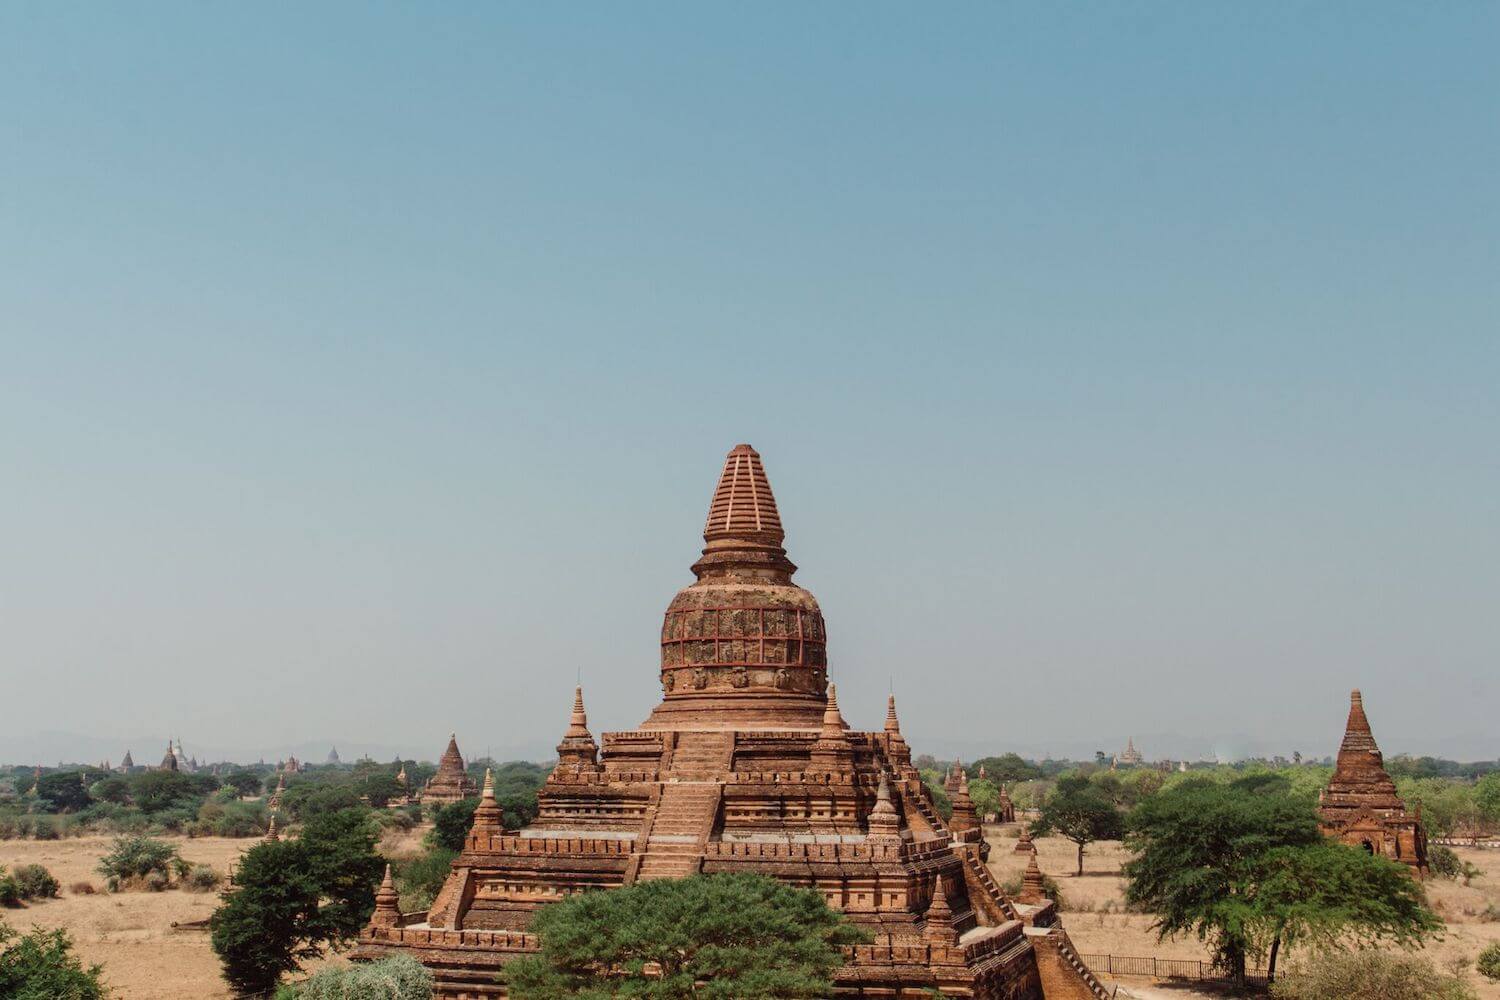 Best Myanmar Itinerary: Photo of an ancient red stone temple in Bagan Myanmar with many other temples in the distance. Photo taken by Ryan Brown of Lost Boy Memoirs, edited in Lightroom.